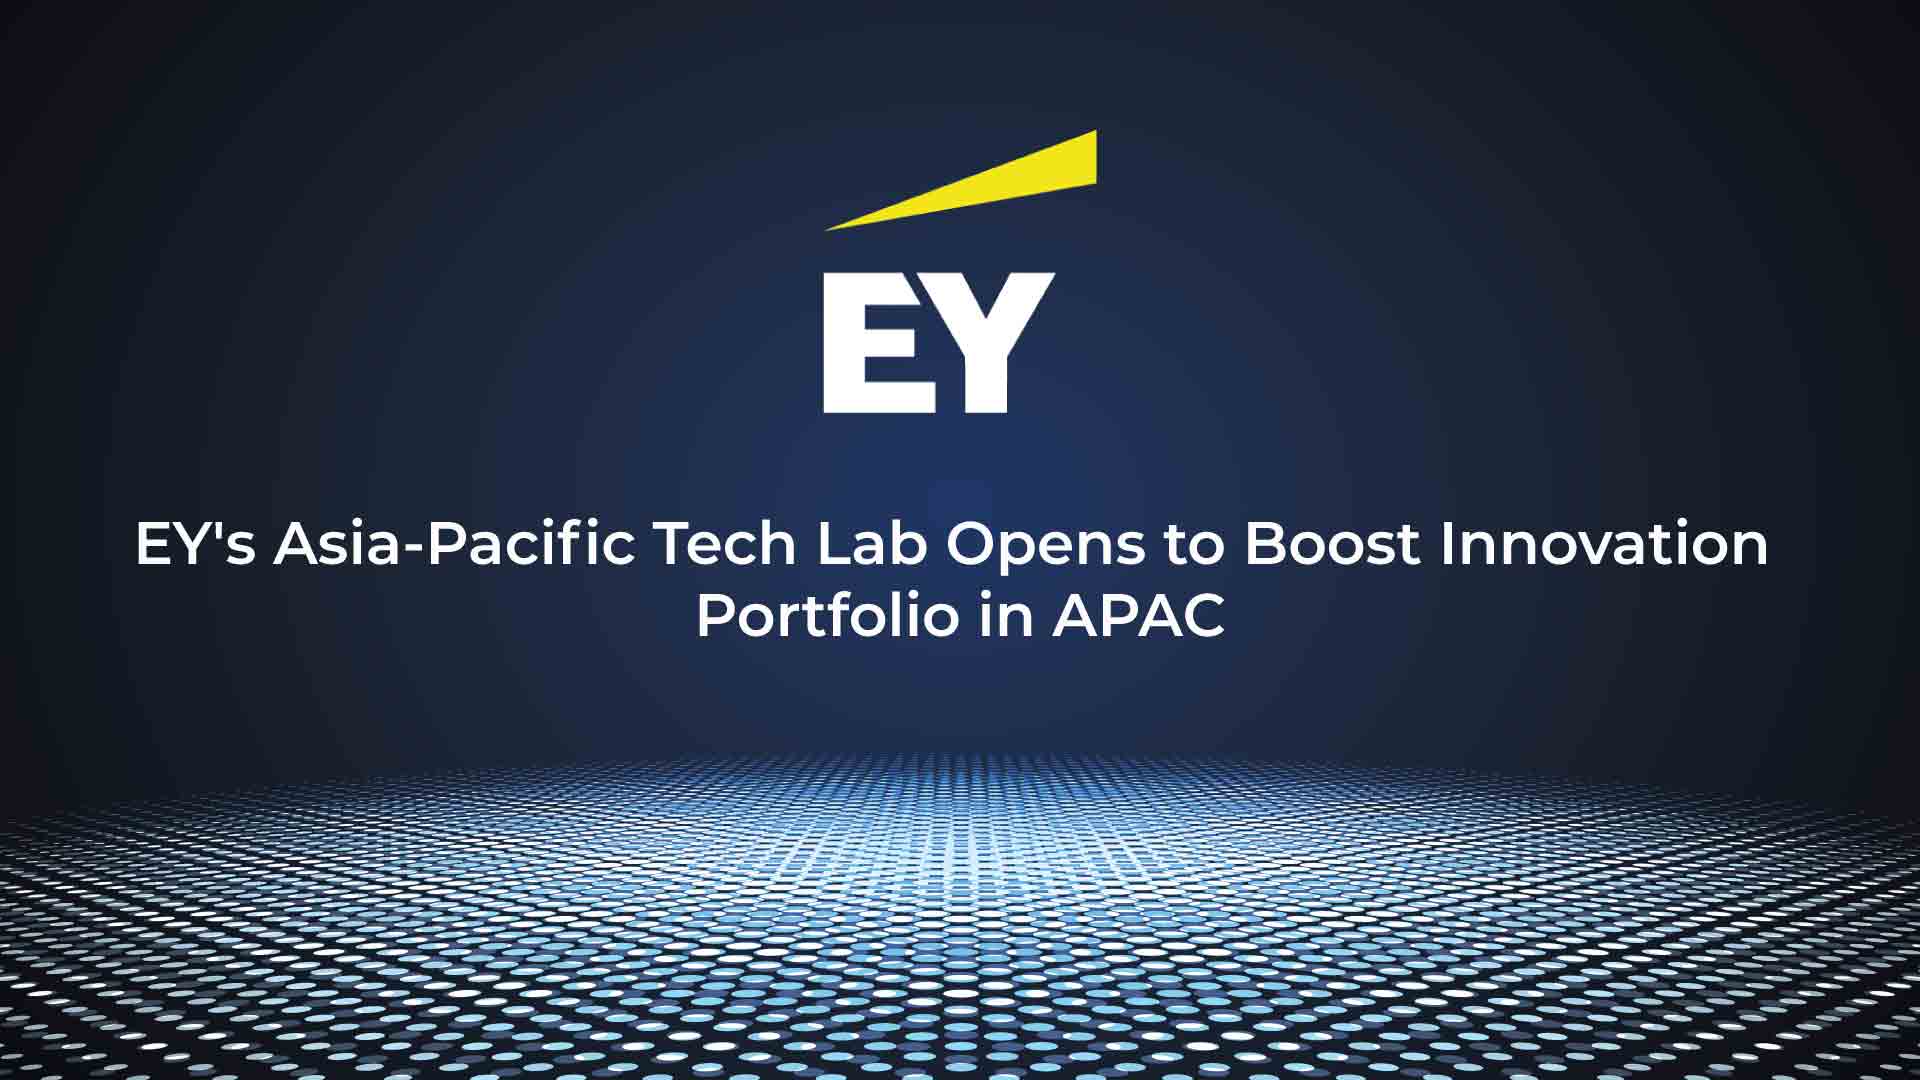 EY announces the opening of an APAC Tech Lab to strengthen Asia-Pacific innovation portfolio